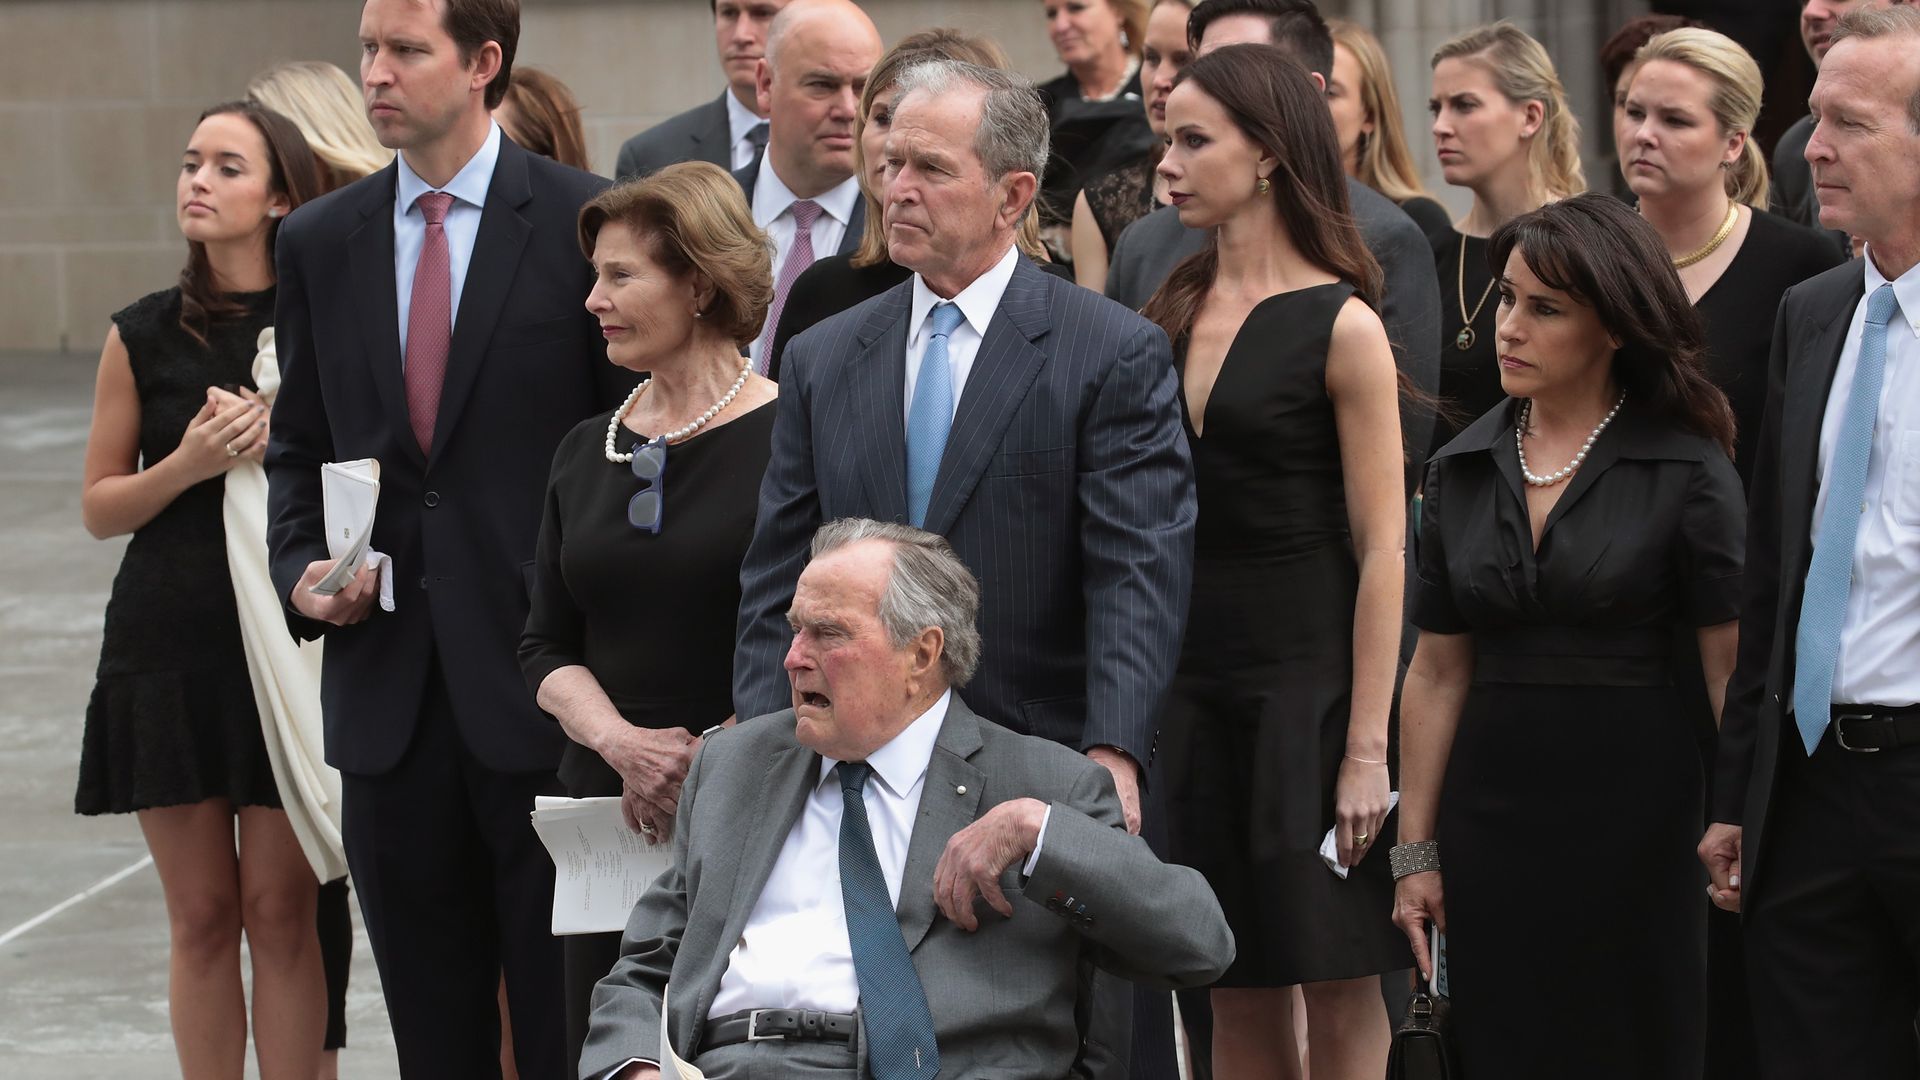 The Bush family together at the funeral